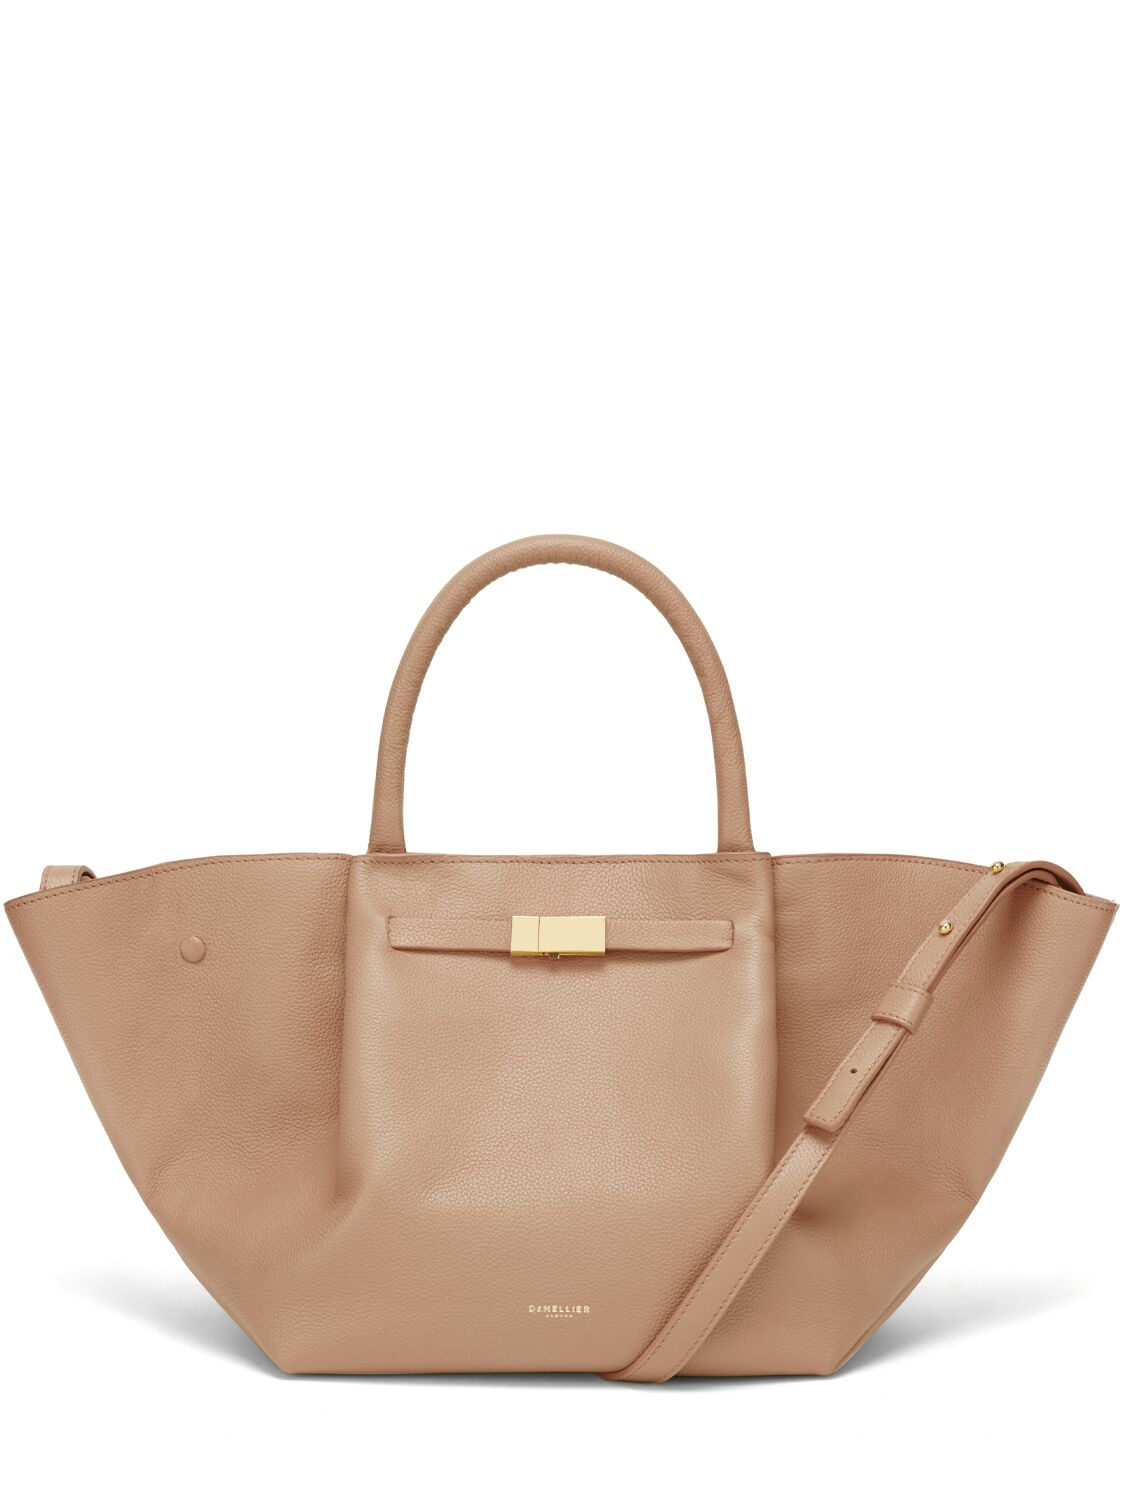 Demellier Grained Leather The New York Tote Bag In Light Tan